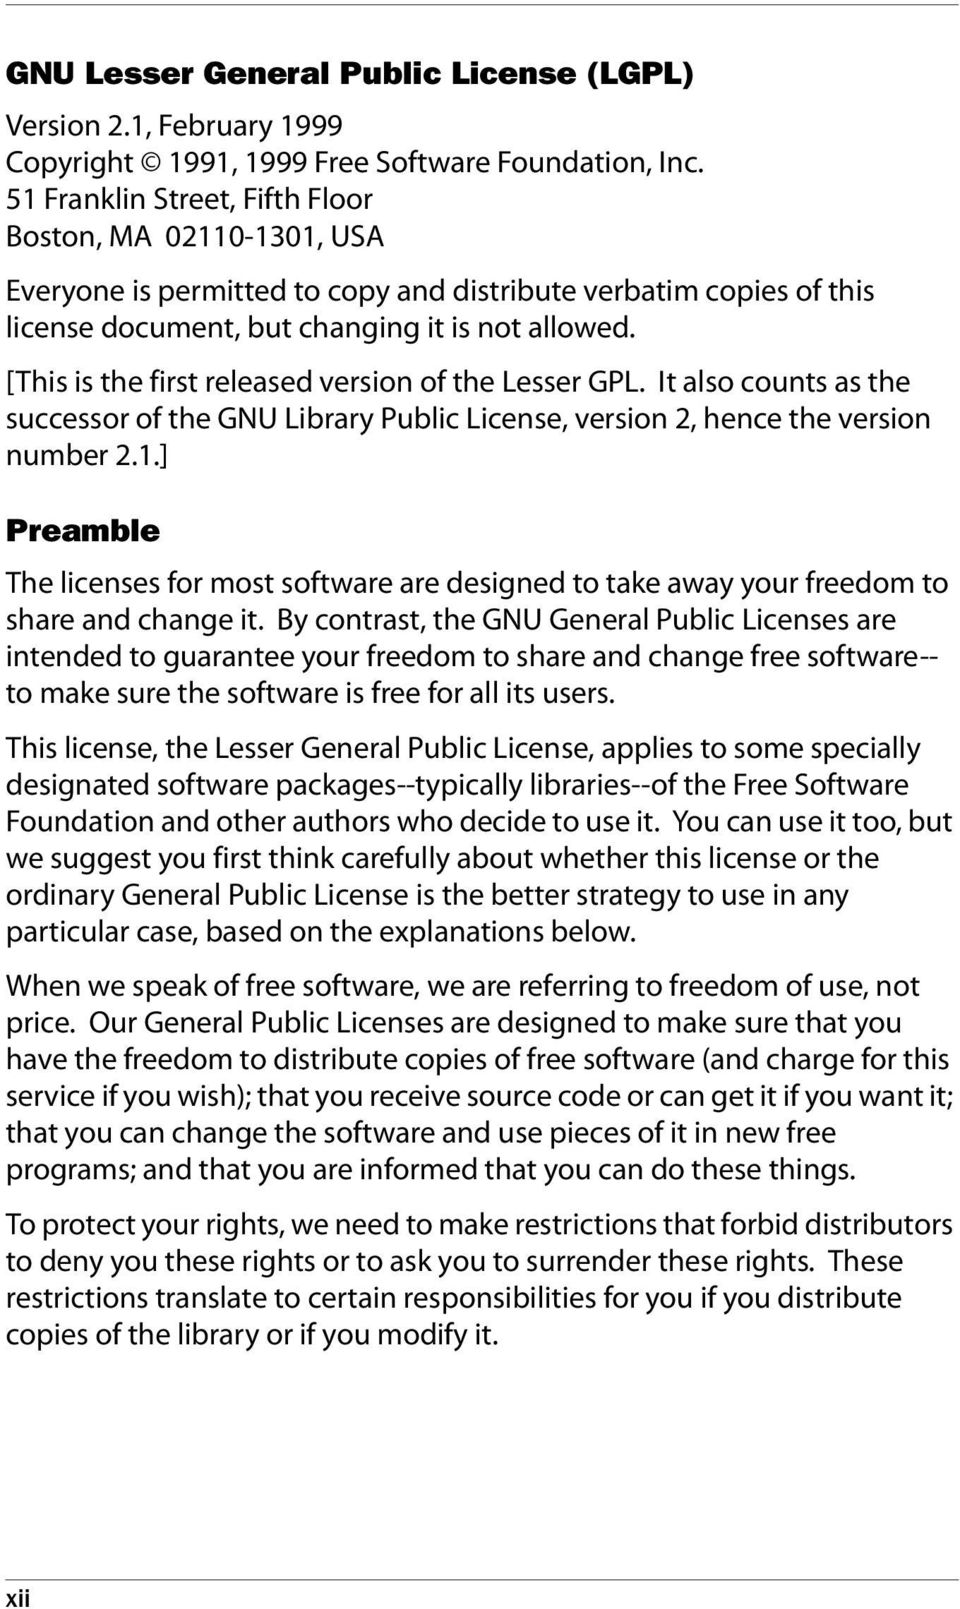 [This is the first released version of the Lesser GPL. It also counts as the successor of the GNU Library Public License, version 2, hence the version number 2.1.